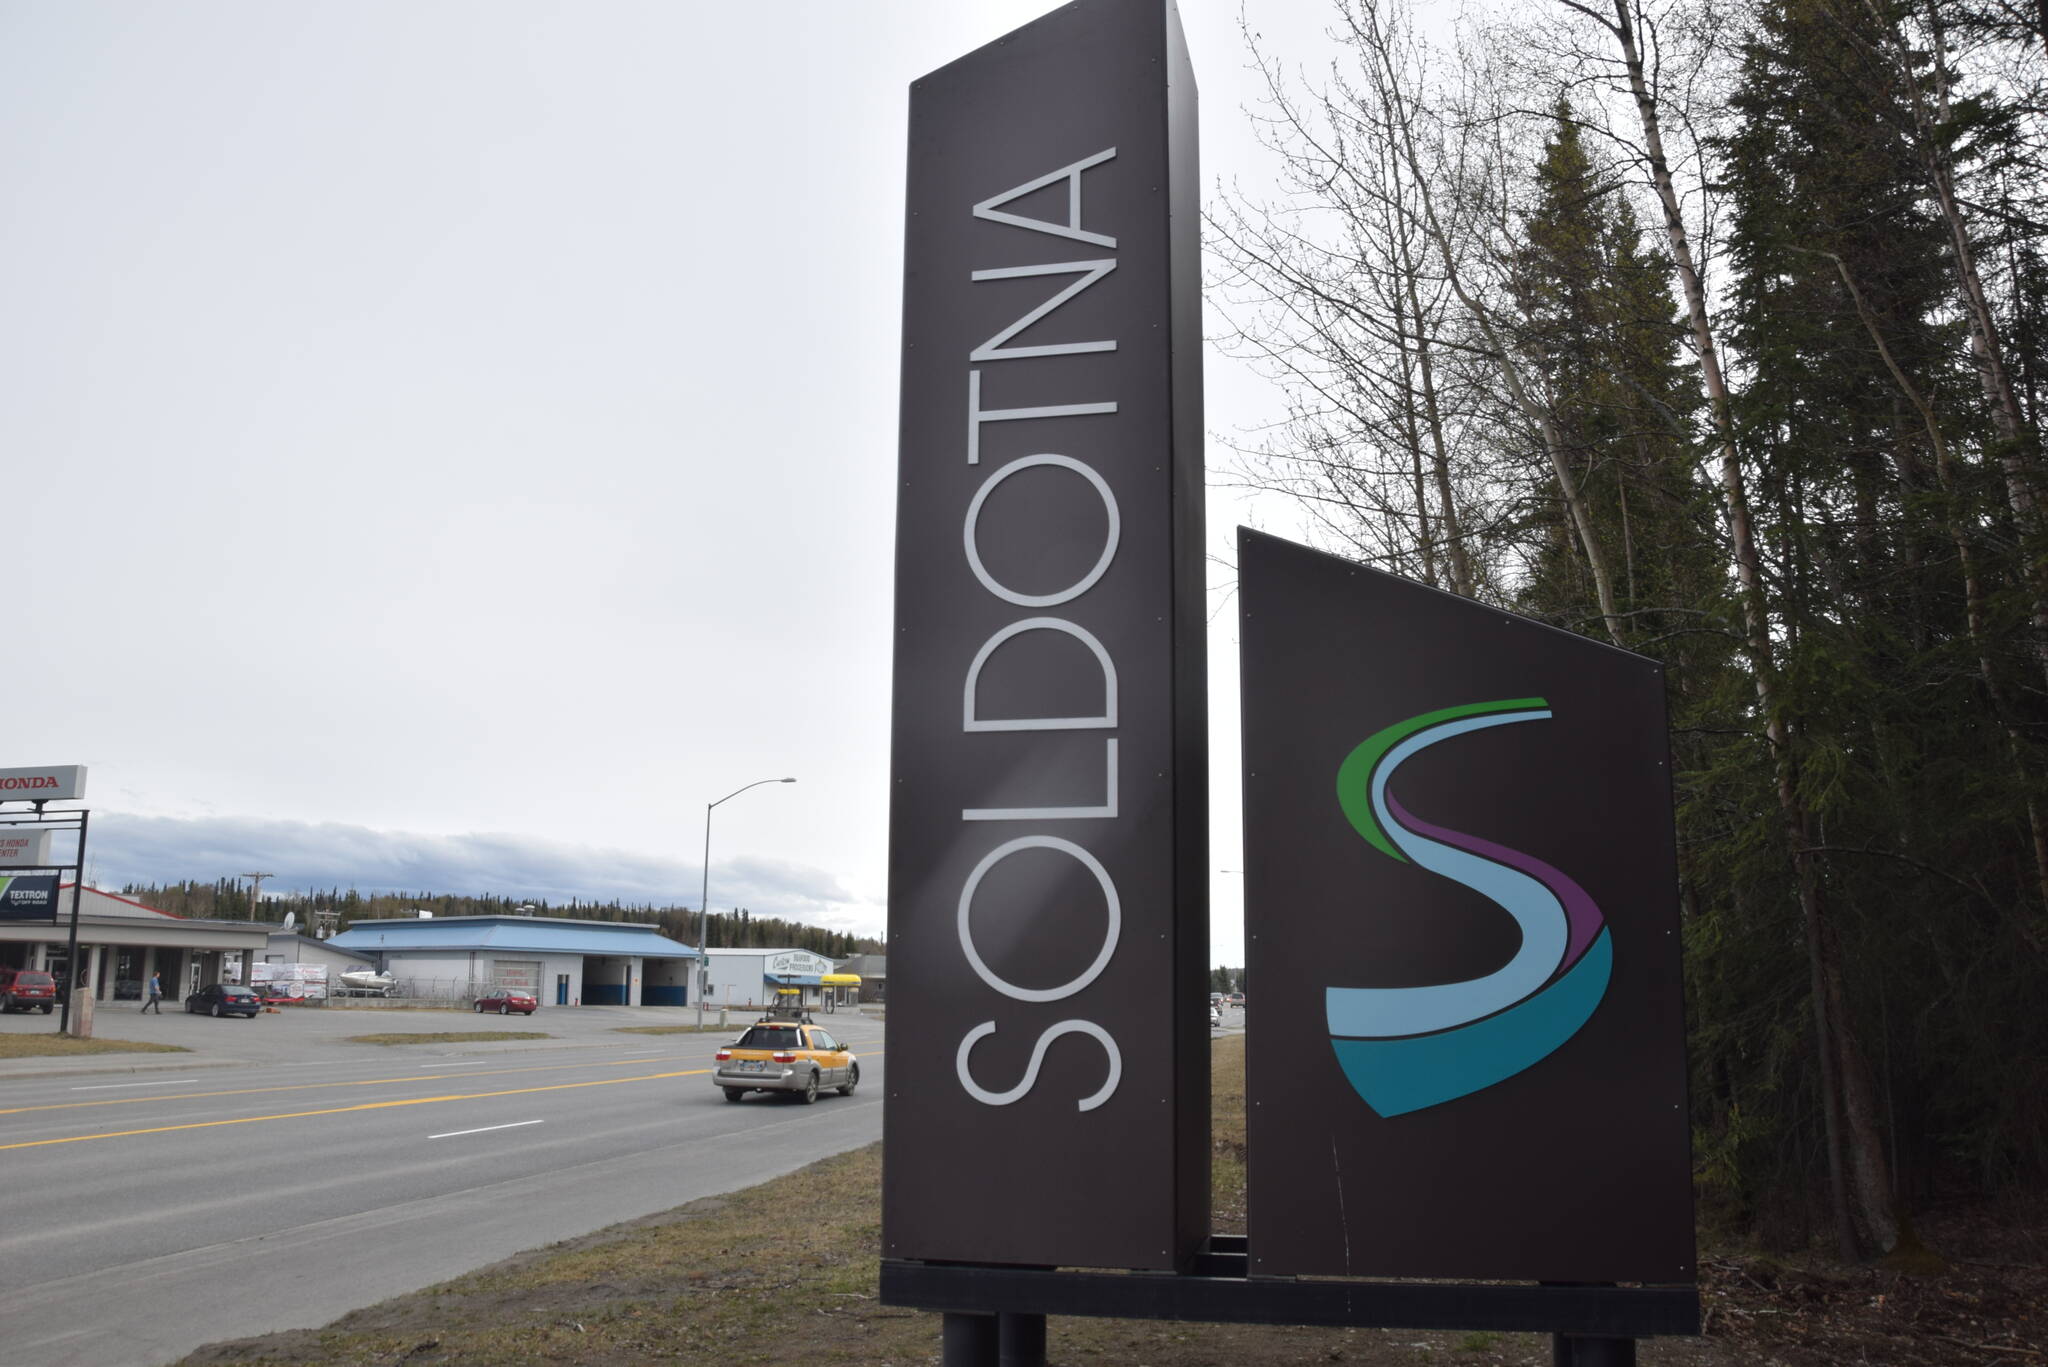 A sign welcoms people to the City of Soldotna on May 1, 2019, in Soldotna, Alaska. (Clarion file)